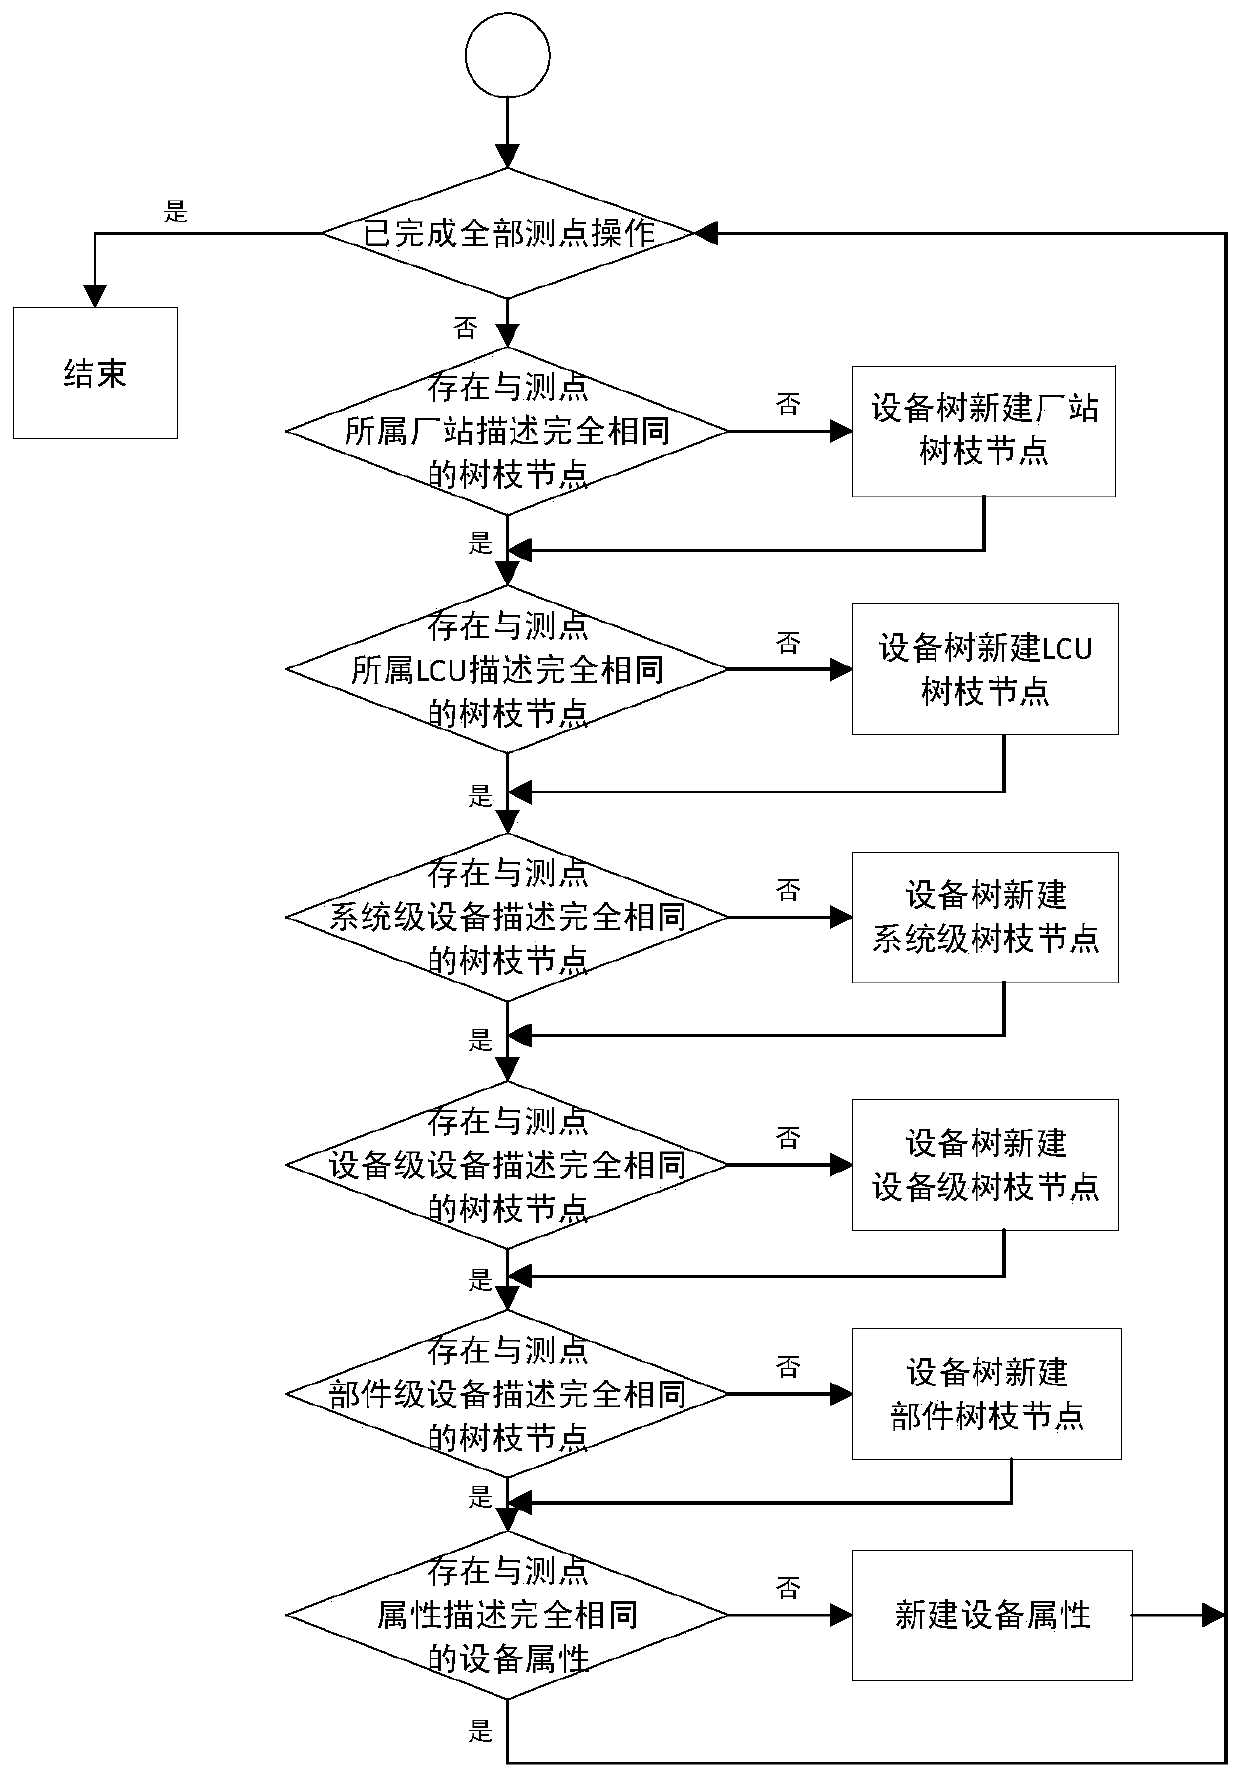 Method and device for automatically establishing equipment object tree for hydraulic power plant monitoring system